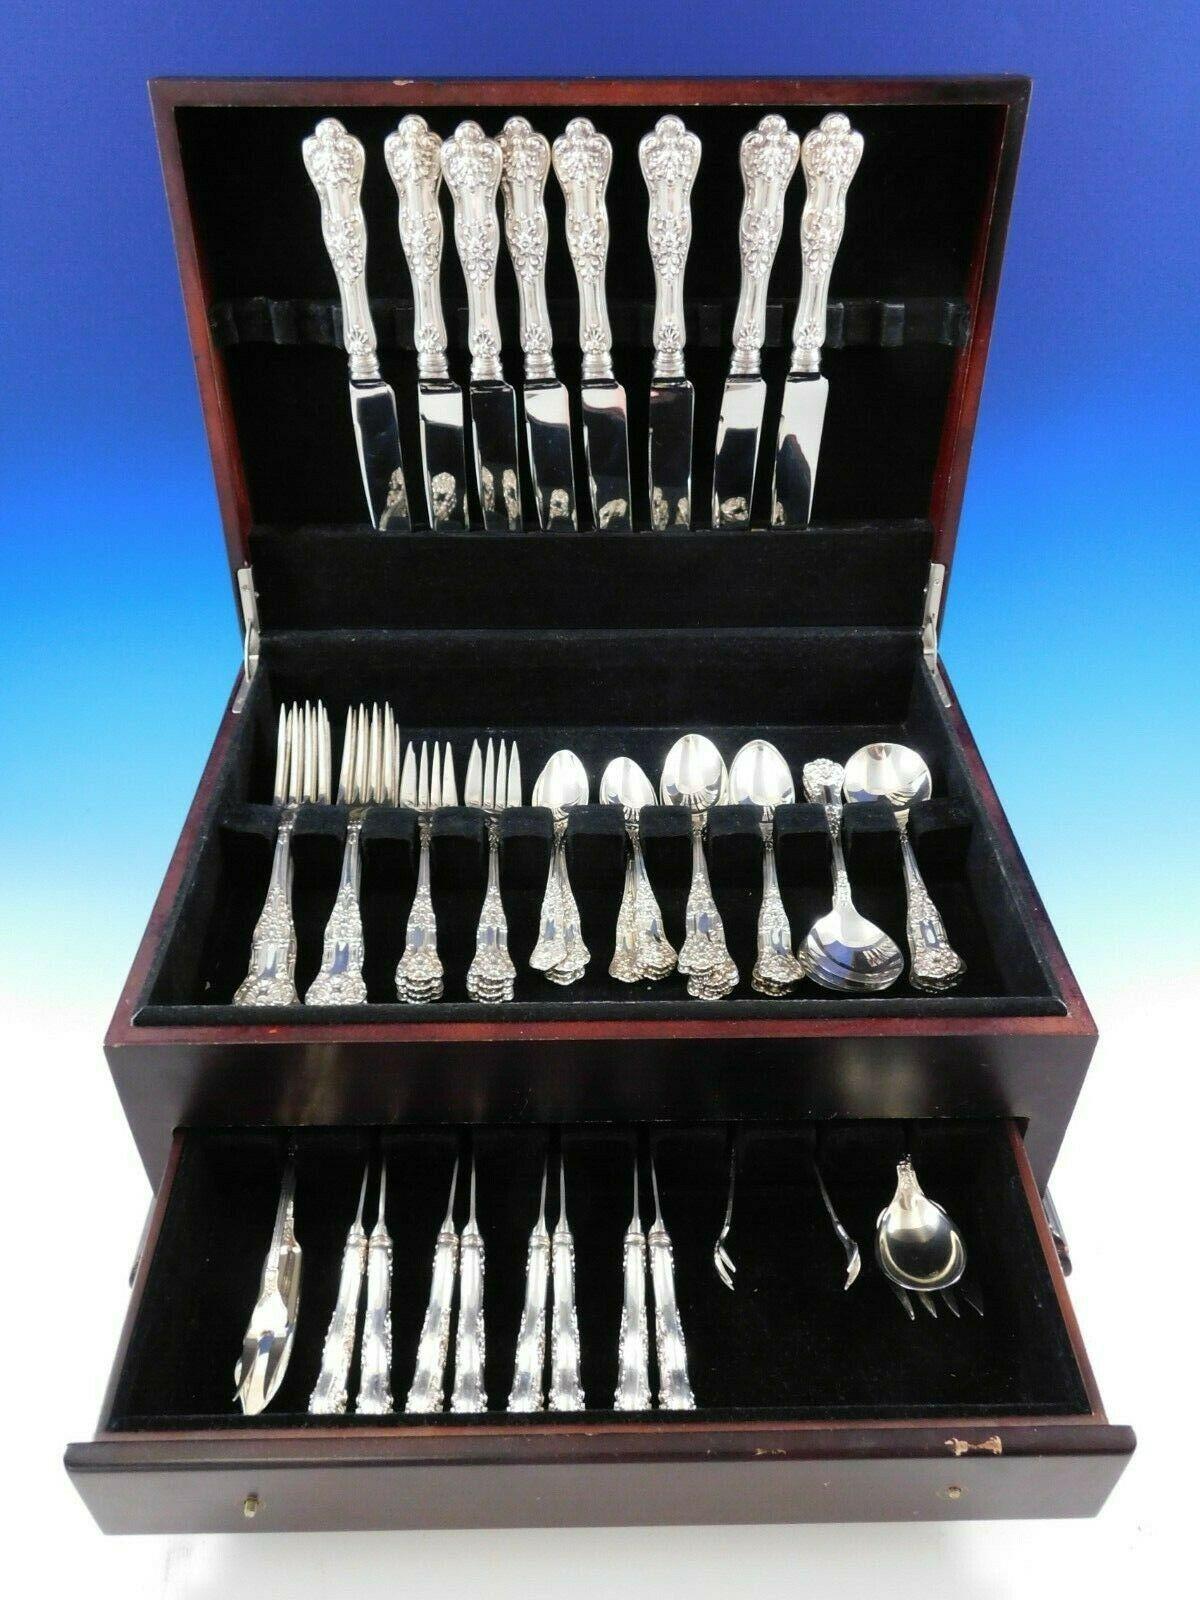 Dinner Size Queens by Birks (Canada) sterling silver Flatware set with classic shell motif, 61 Pieces. This set includes:

8 dinner size knives, 10 1/4